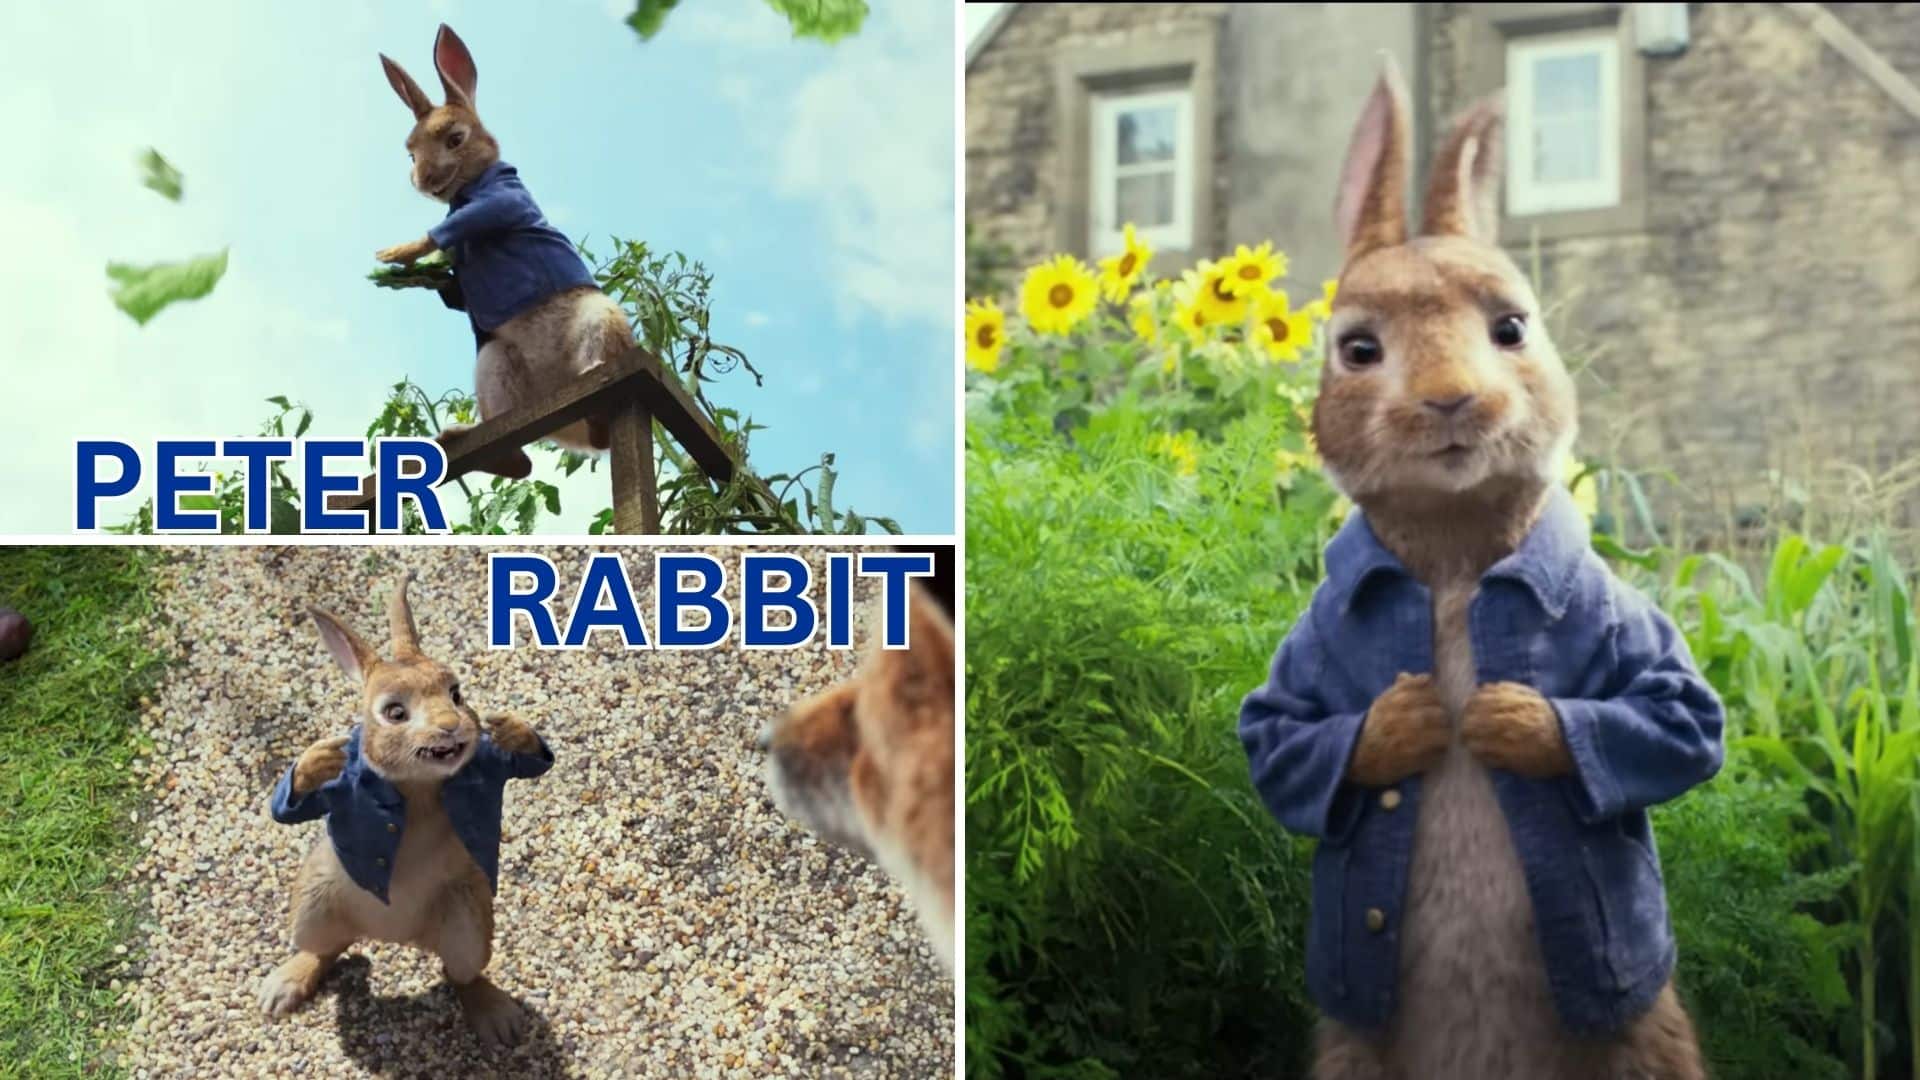 Movie About Peter Rabbit